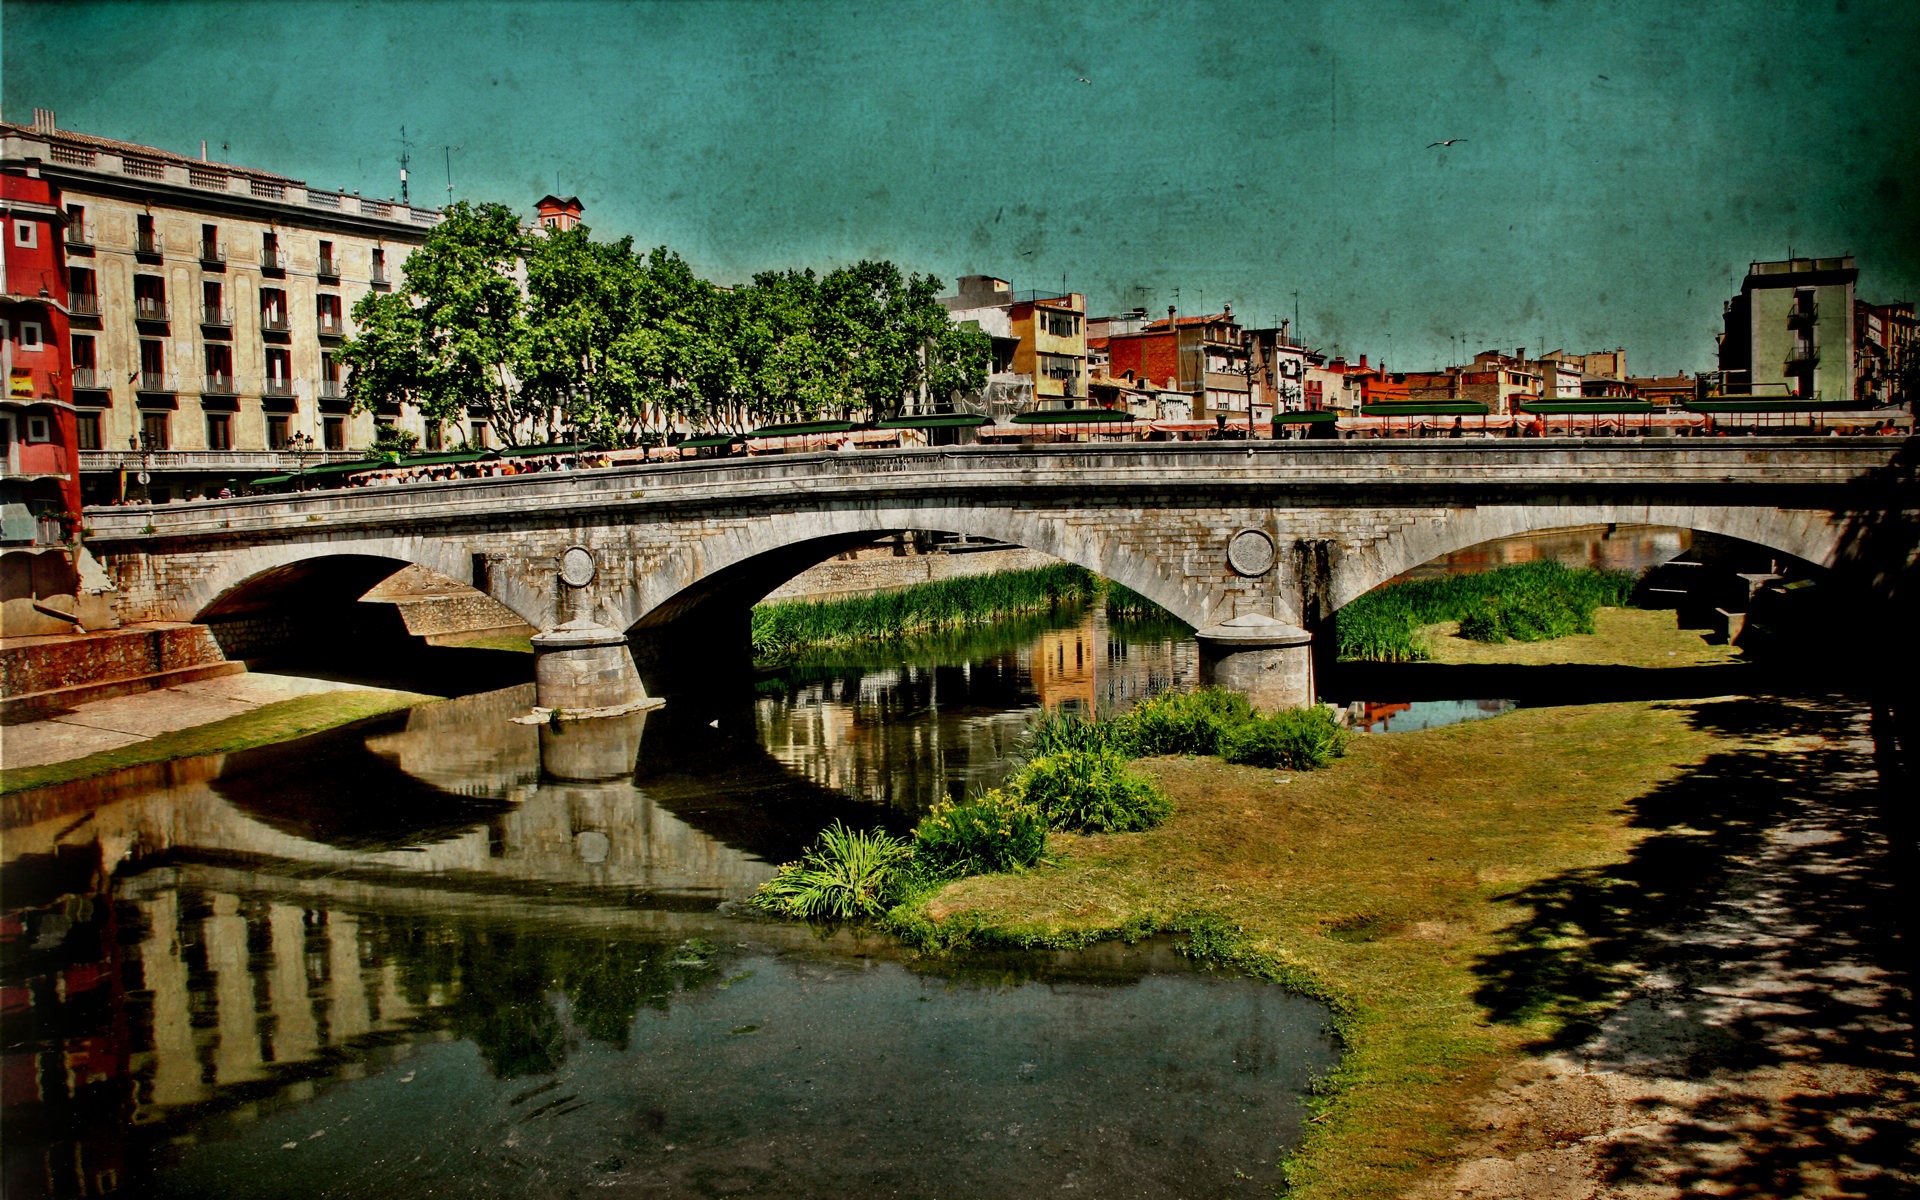 Spain Girona HDR-style wallpapers #15 - 1920x1200